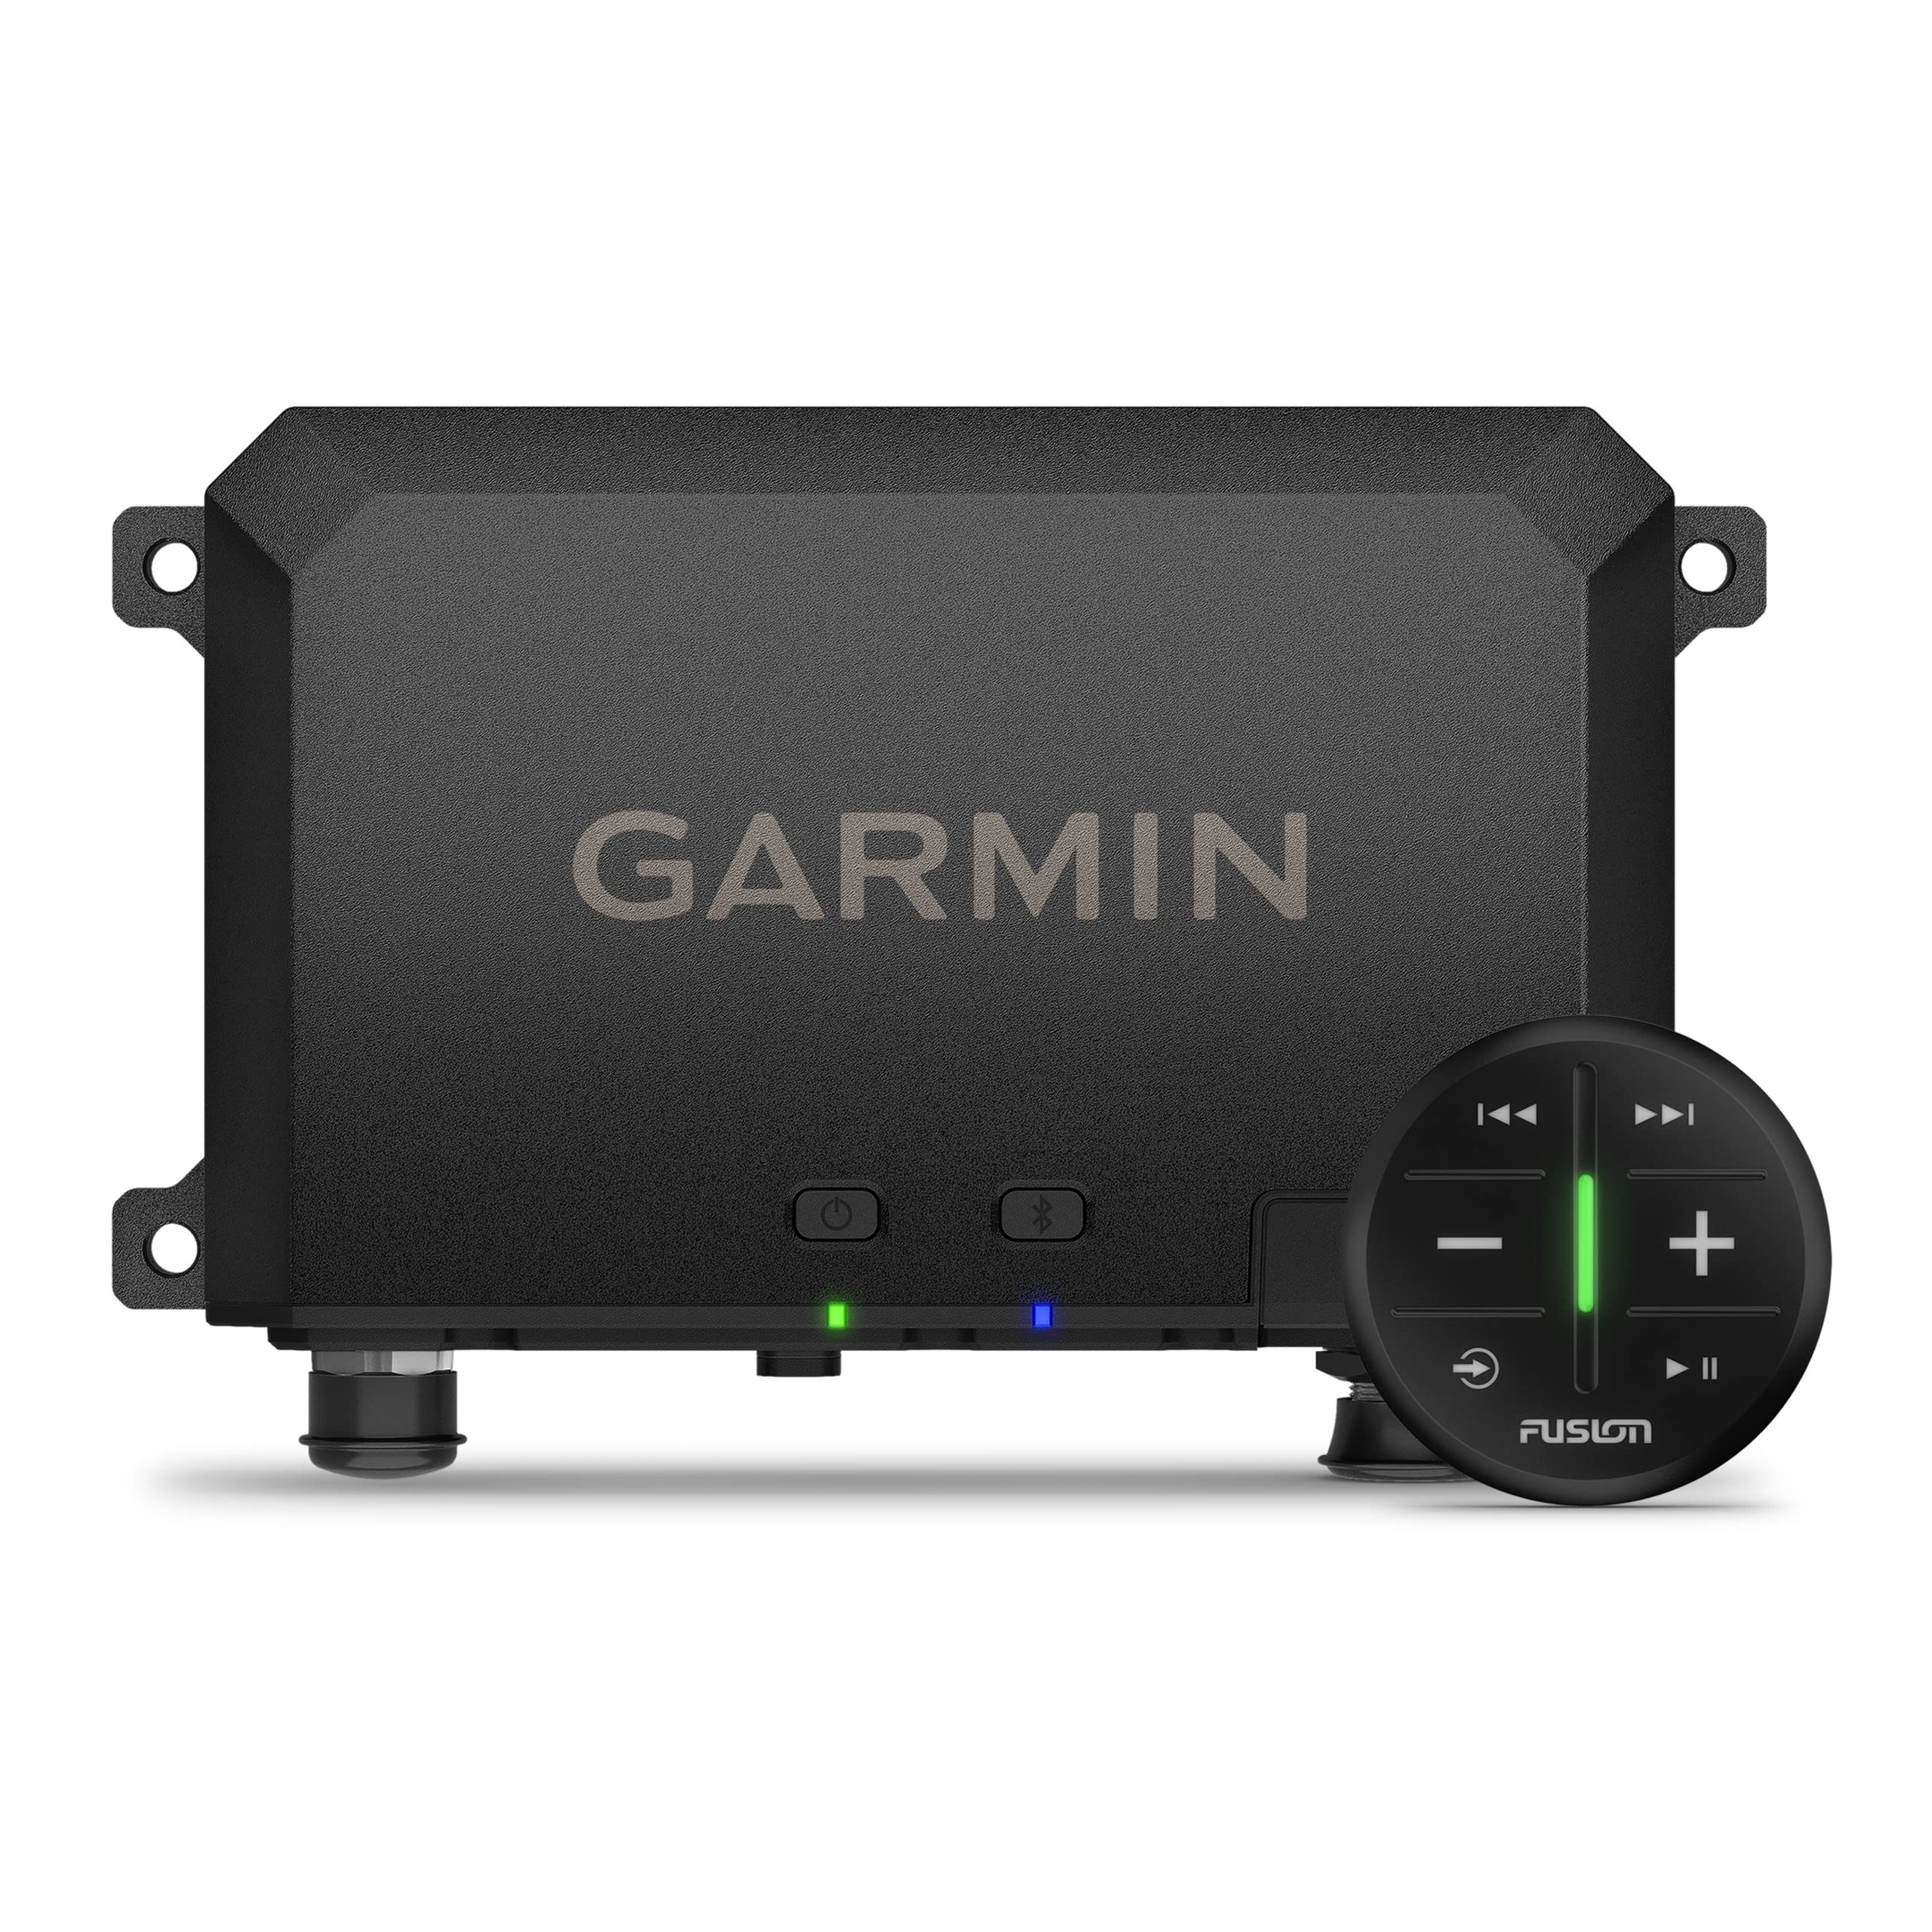 Garmin - Tread Audio Box with LED Controller, Rugged Design, Premium Quality Audio with Wireless Remote